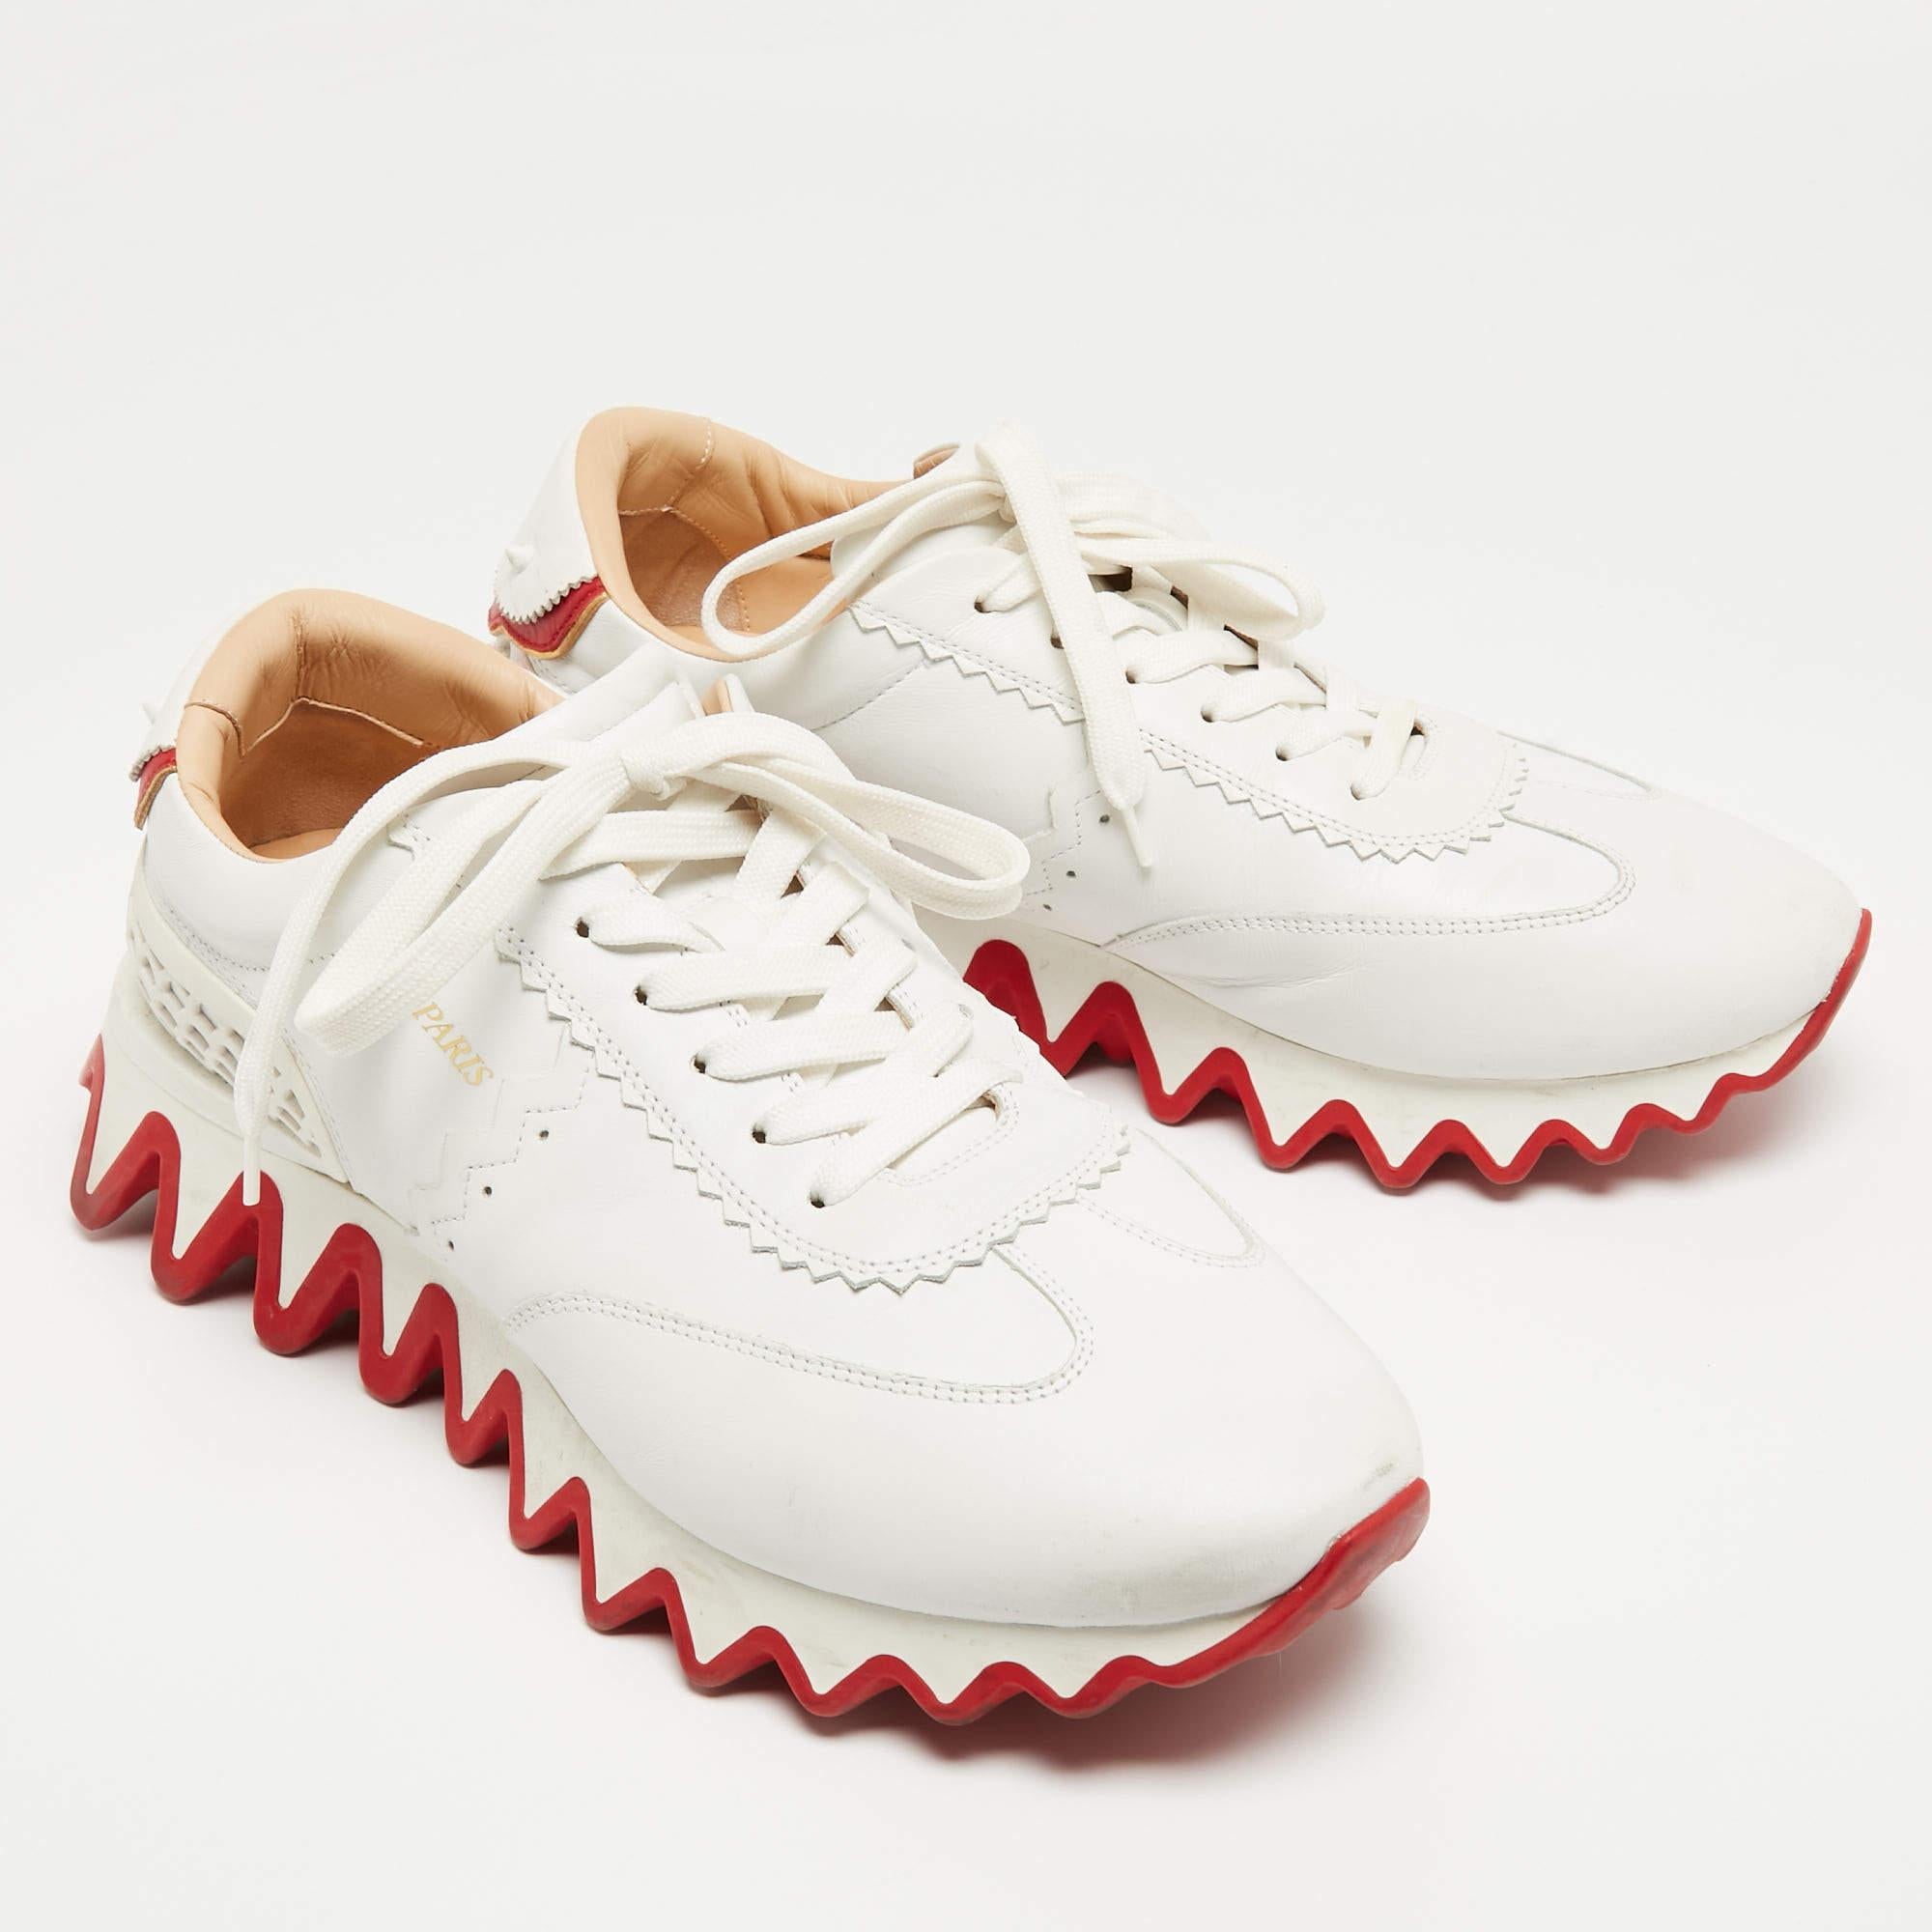 Step up your sneaker game with the Christian Louboutin Loubishark sneakers. Crafted with premium leather, these eye-catching kicks feature a vibrant design that adds a playful touch to any outfit. Complete with the signature red sole and lace-up